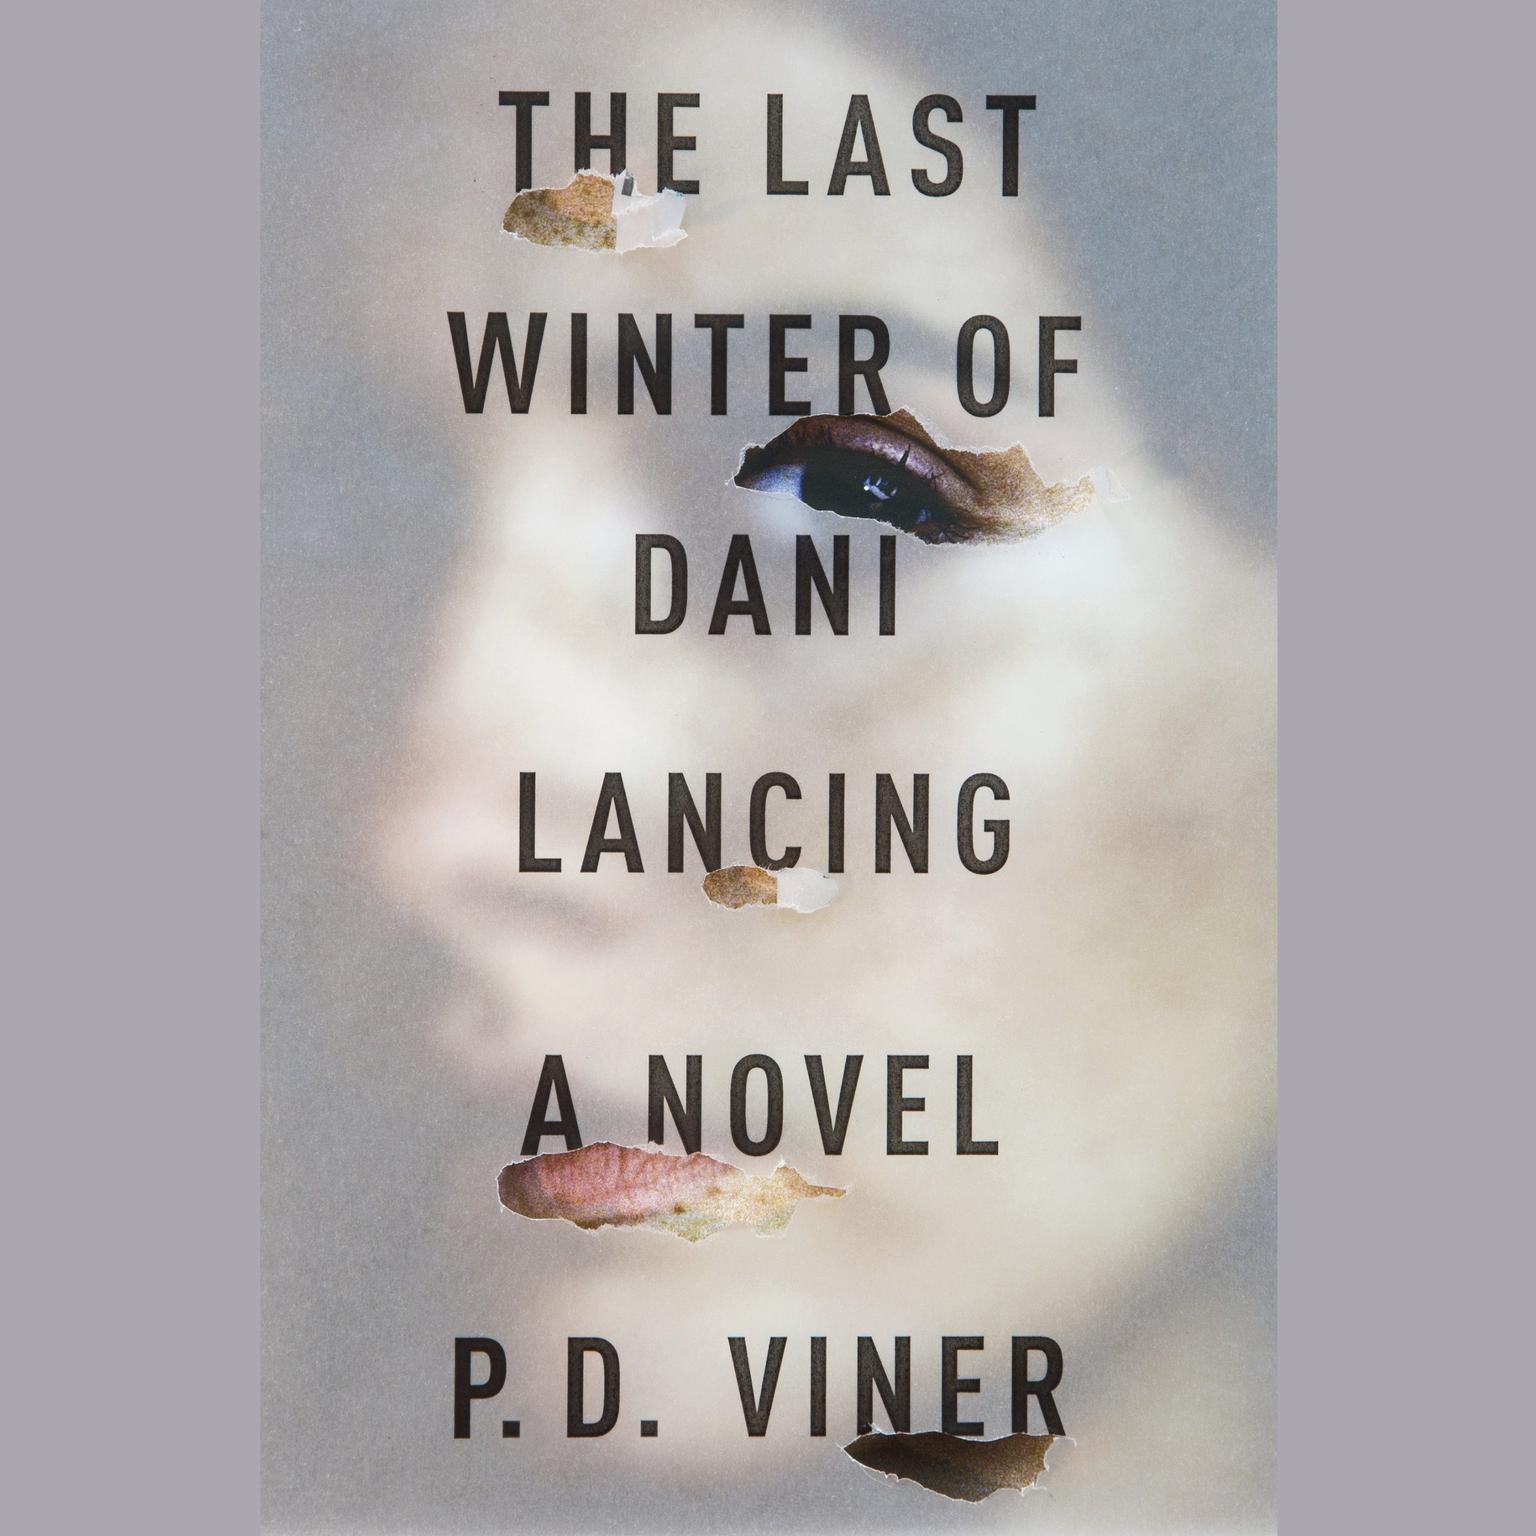 The Last Winter of Dani Lancing: A Novel Audiobook, by P. D. Viner